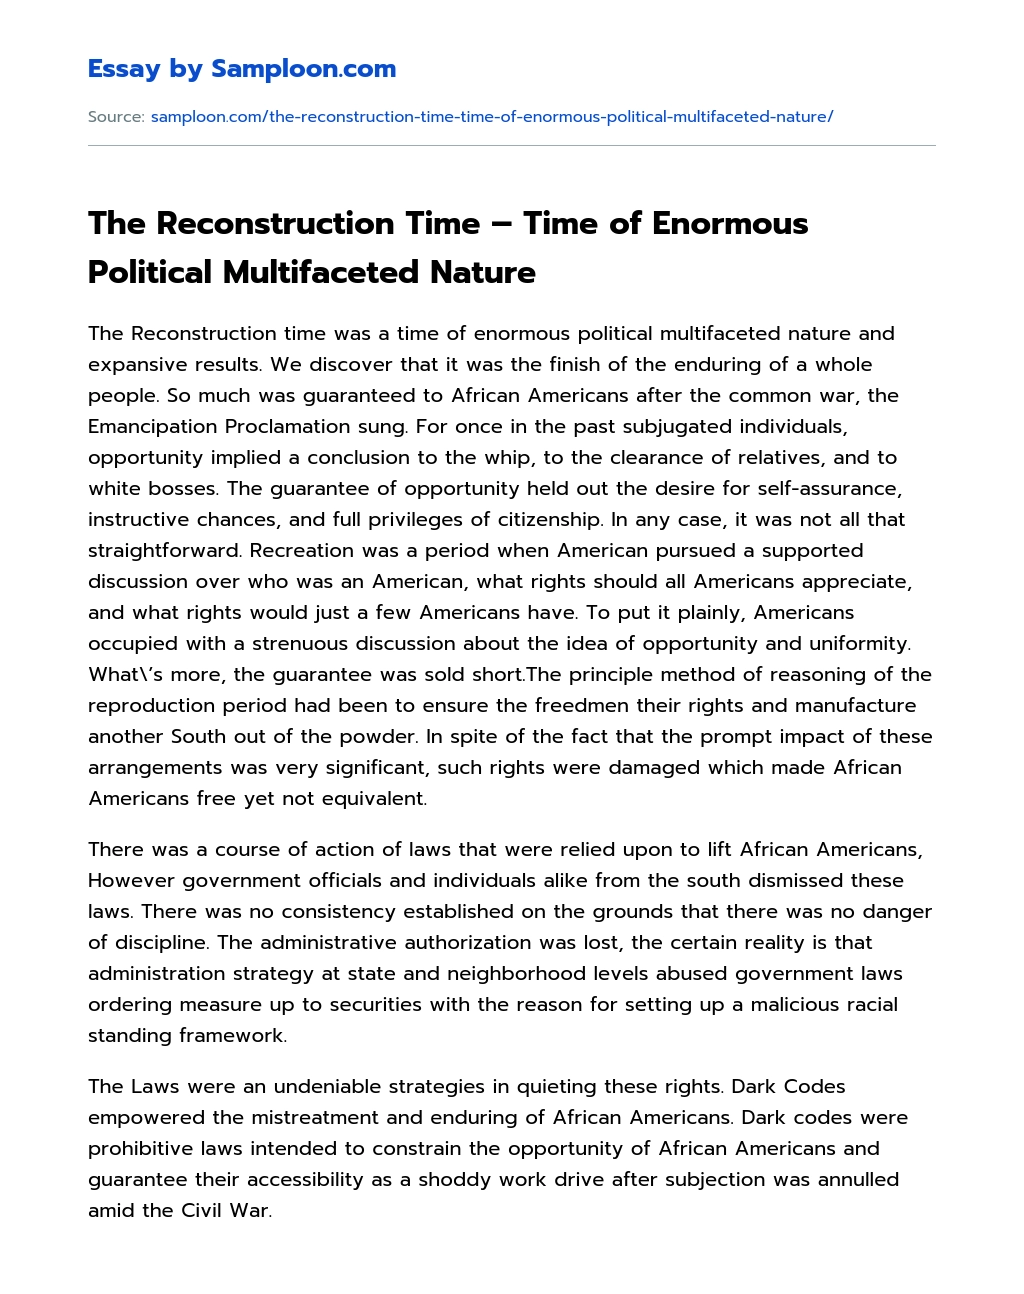 The Reconstruction Time – Time of Enormous Political Multifaceted Nature essay